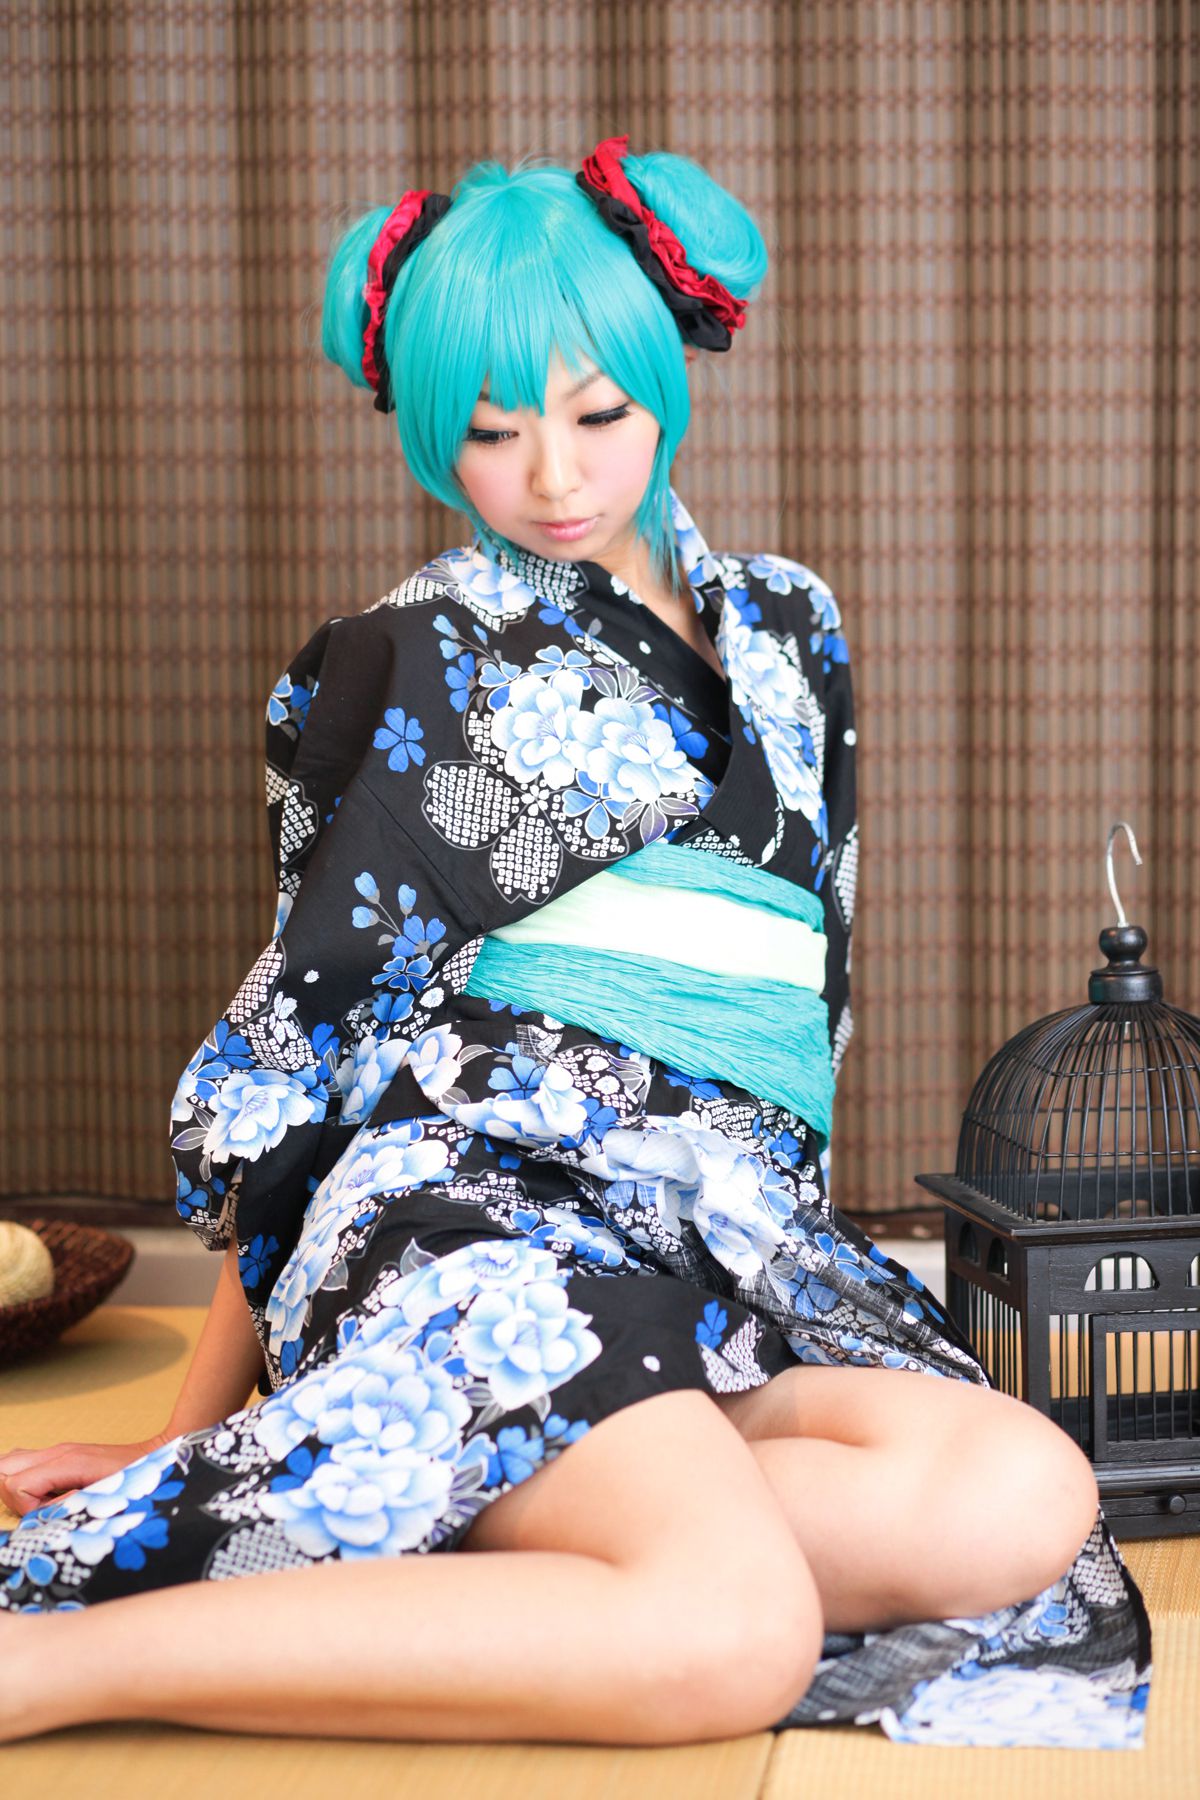 taotuhome[Cosplay] Necoco as Hatsune Miku from Vocaloid 套图第101张